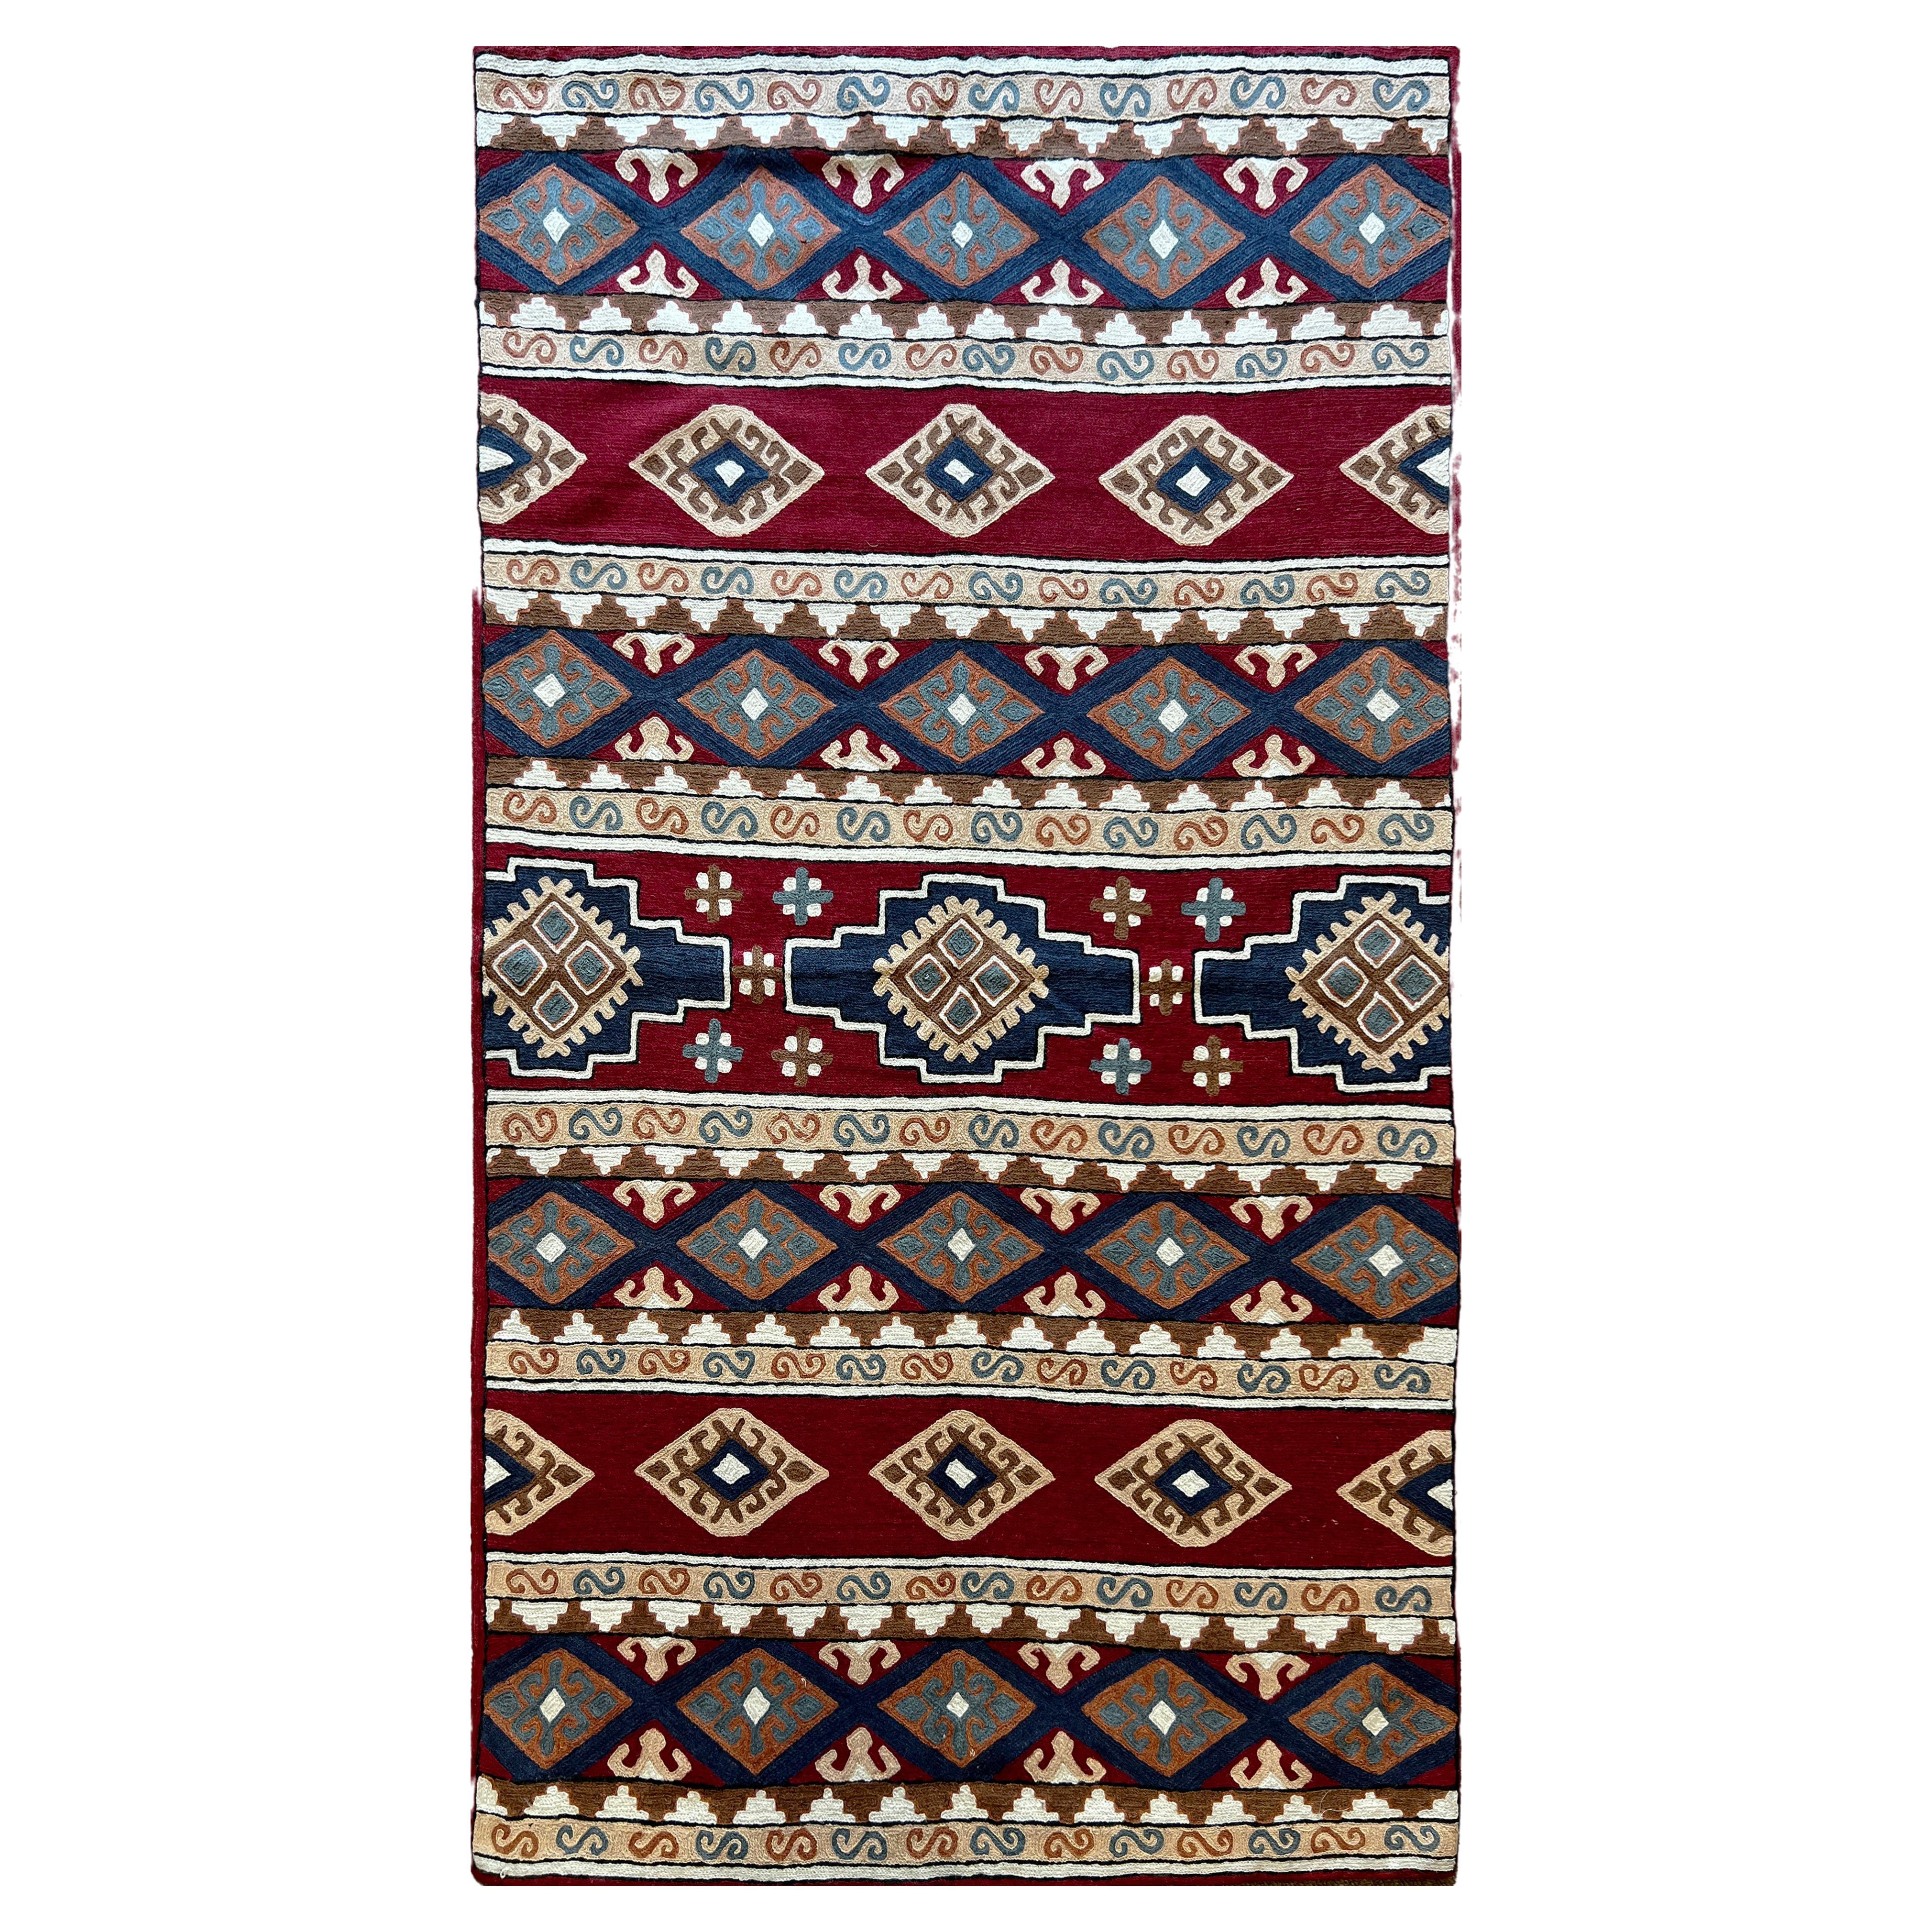  Indian Kilim "Durie", 20th Century  - N° 685 For Sale